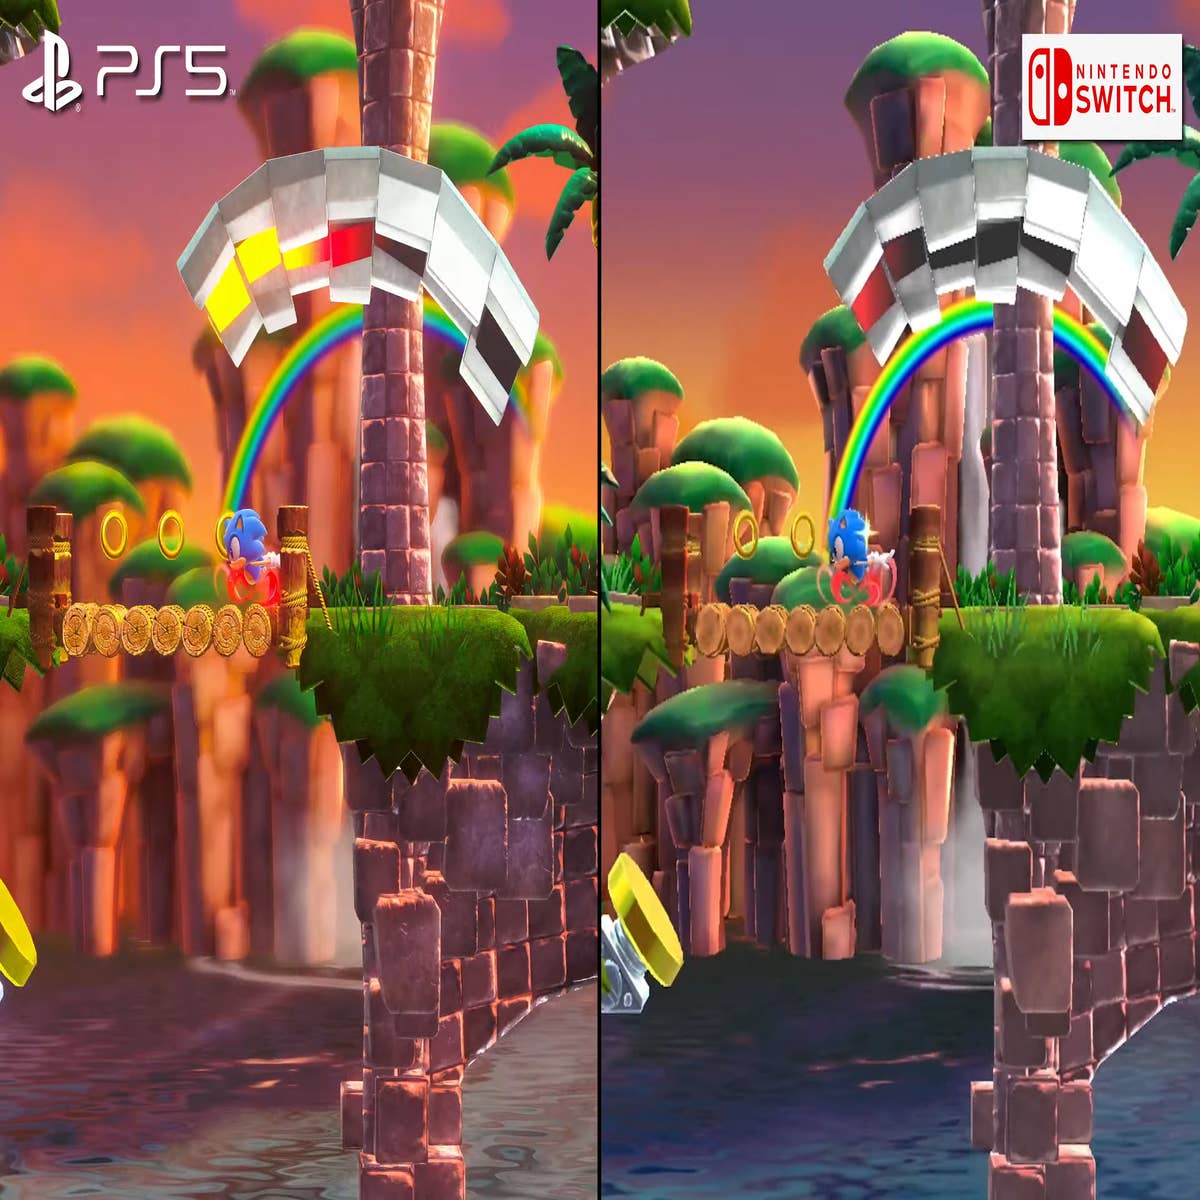 Green hill zone made with unreal engine 3